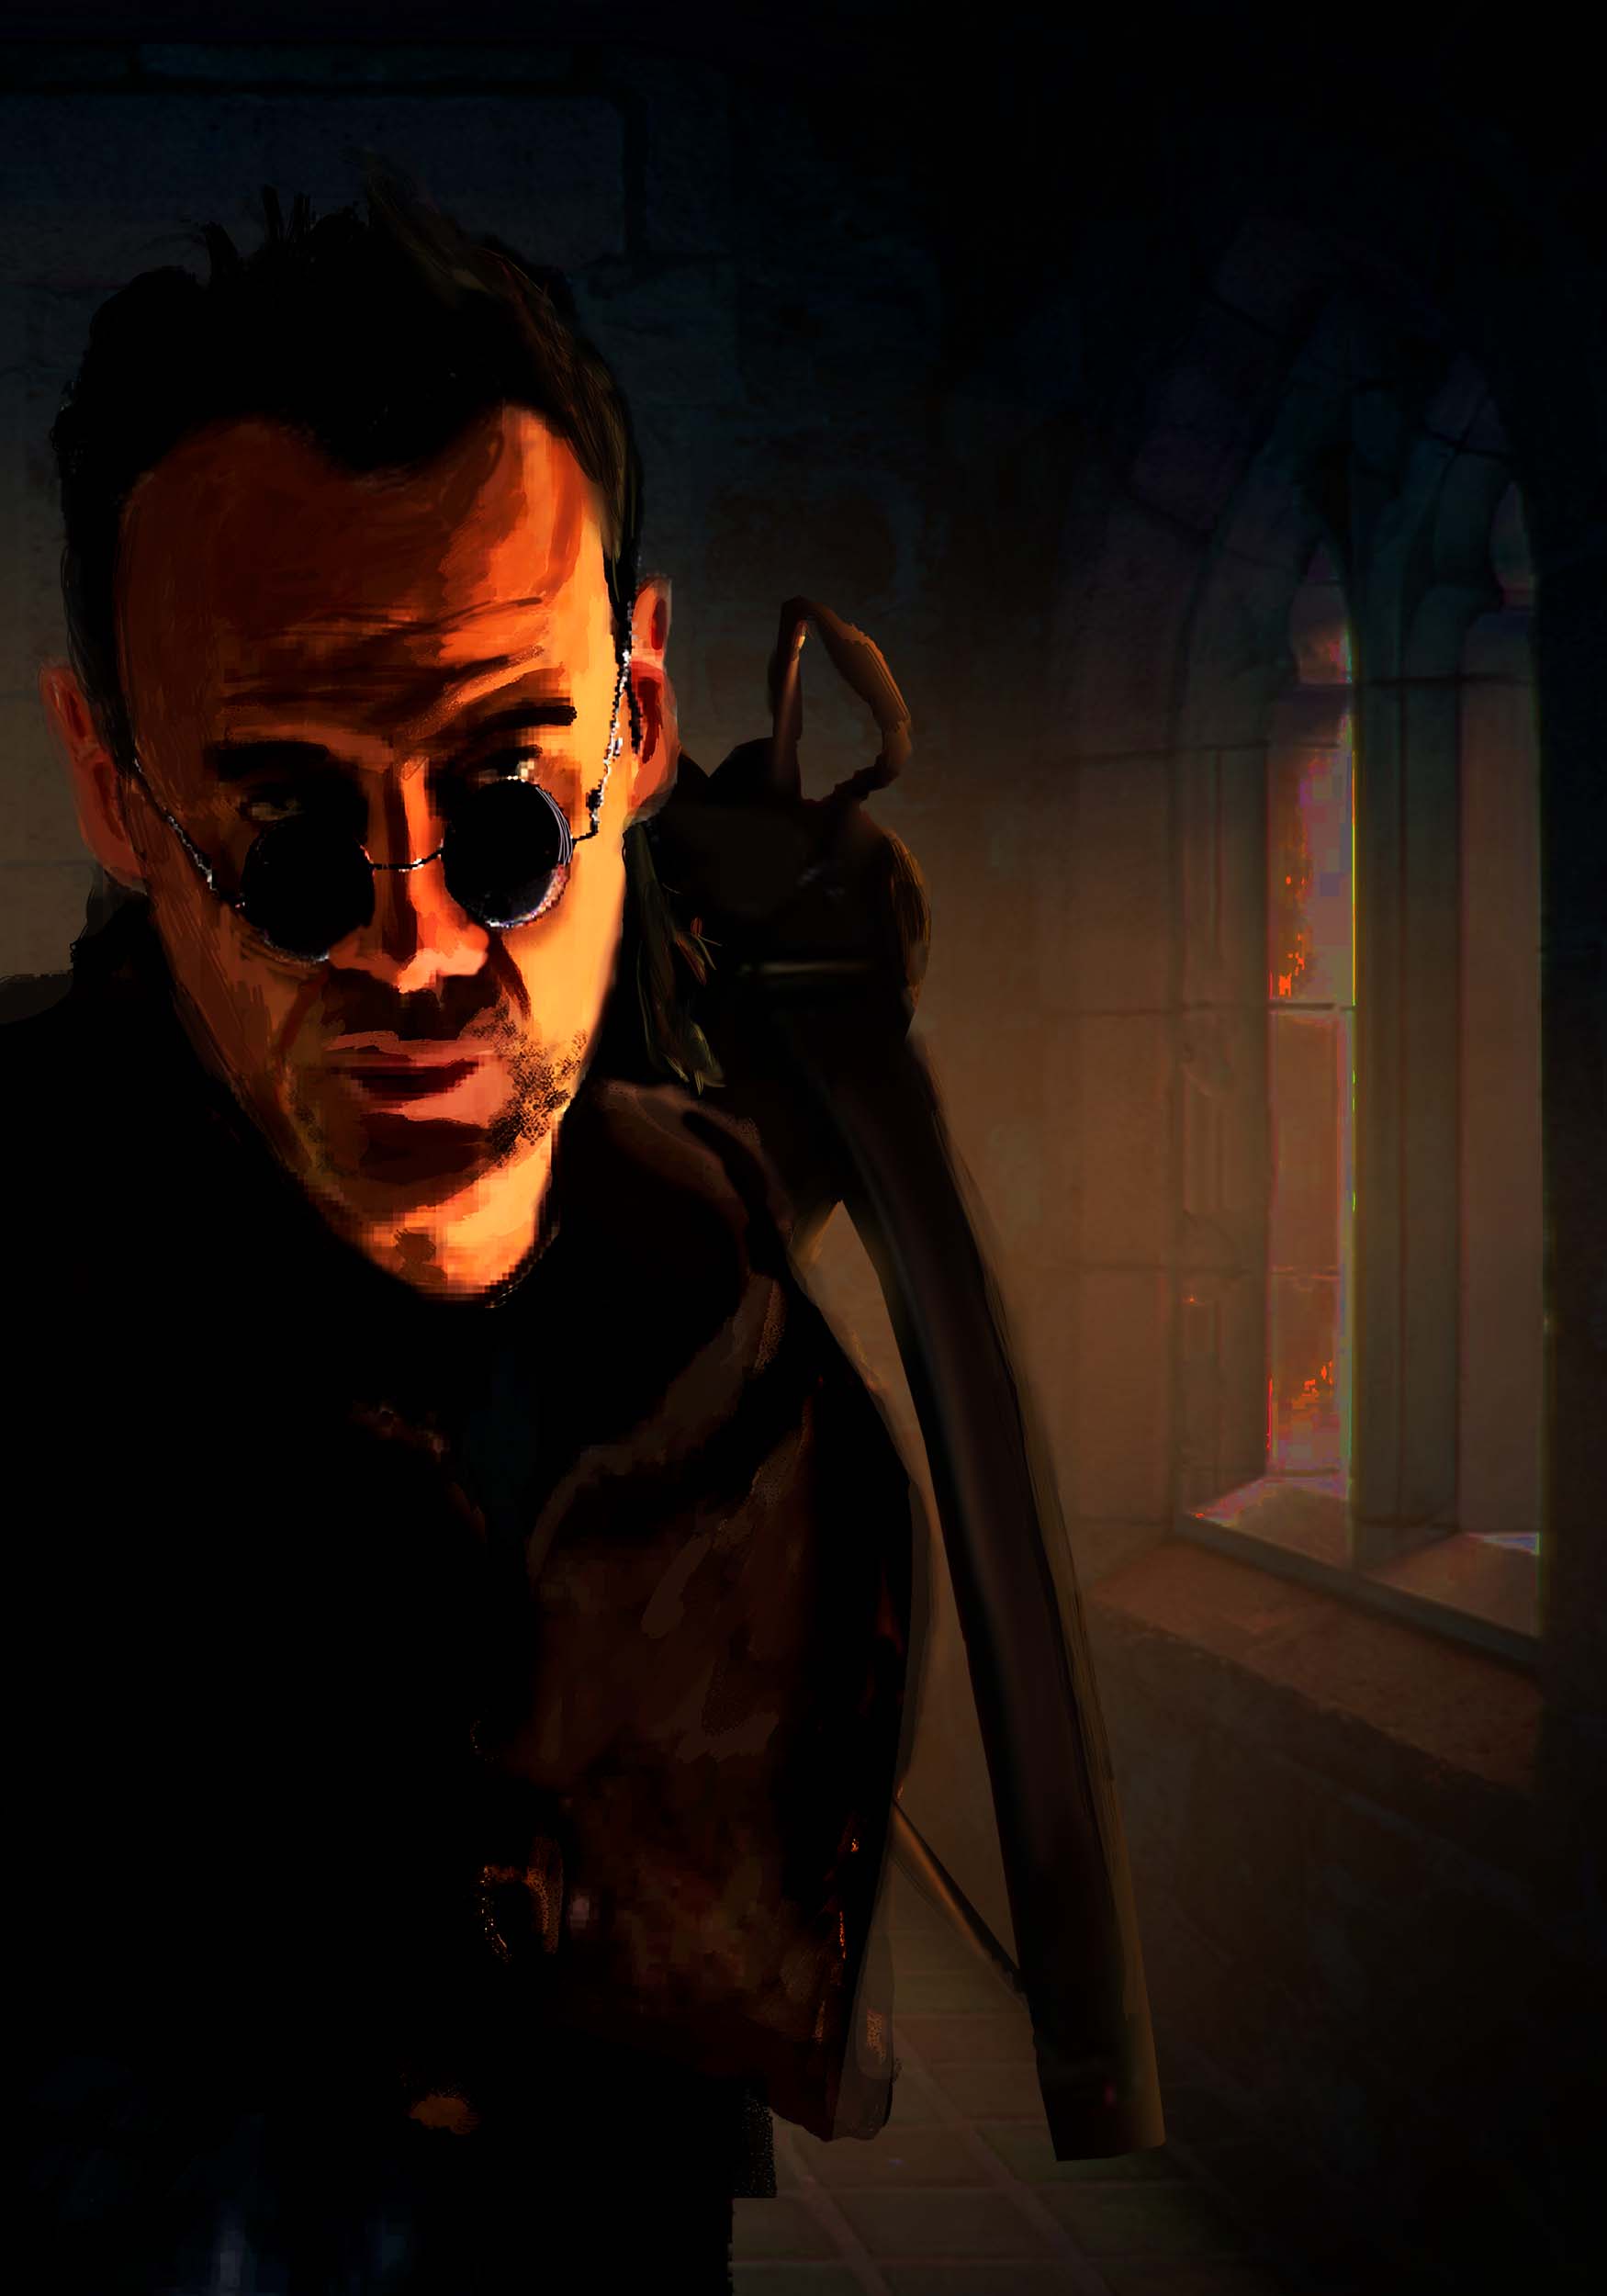 Concept artwork by Jack Oakes: An older man with glasses and a crossbow looks at the viewer with a kind of smug expression.